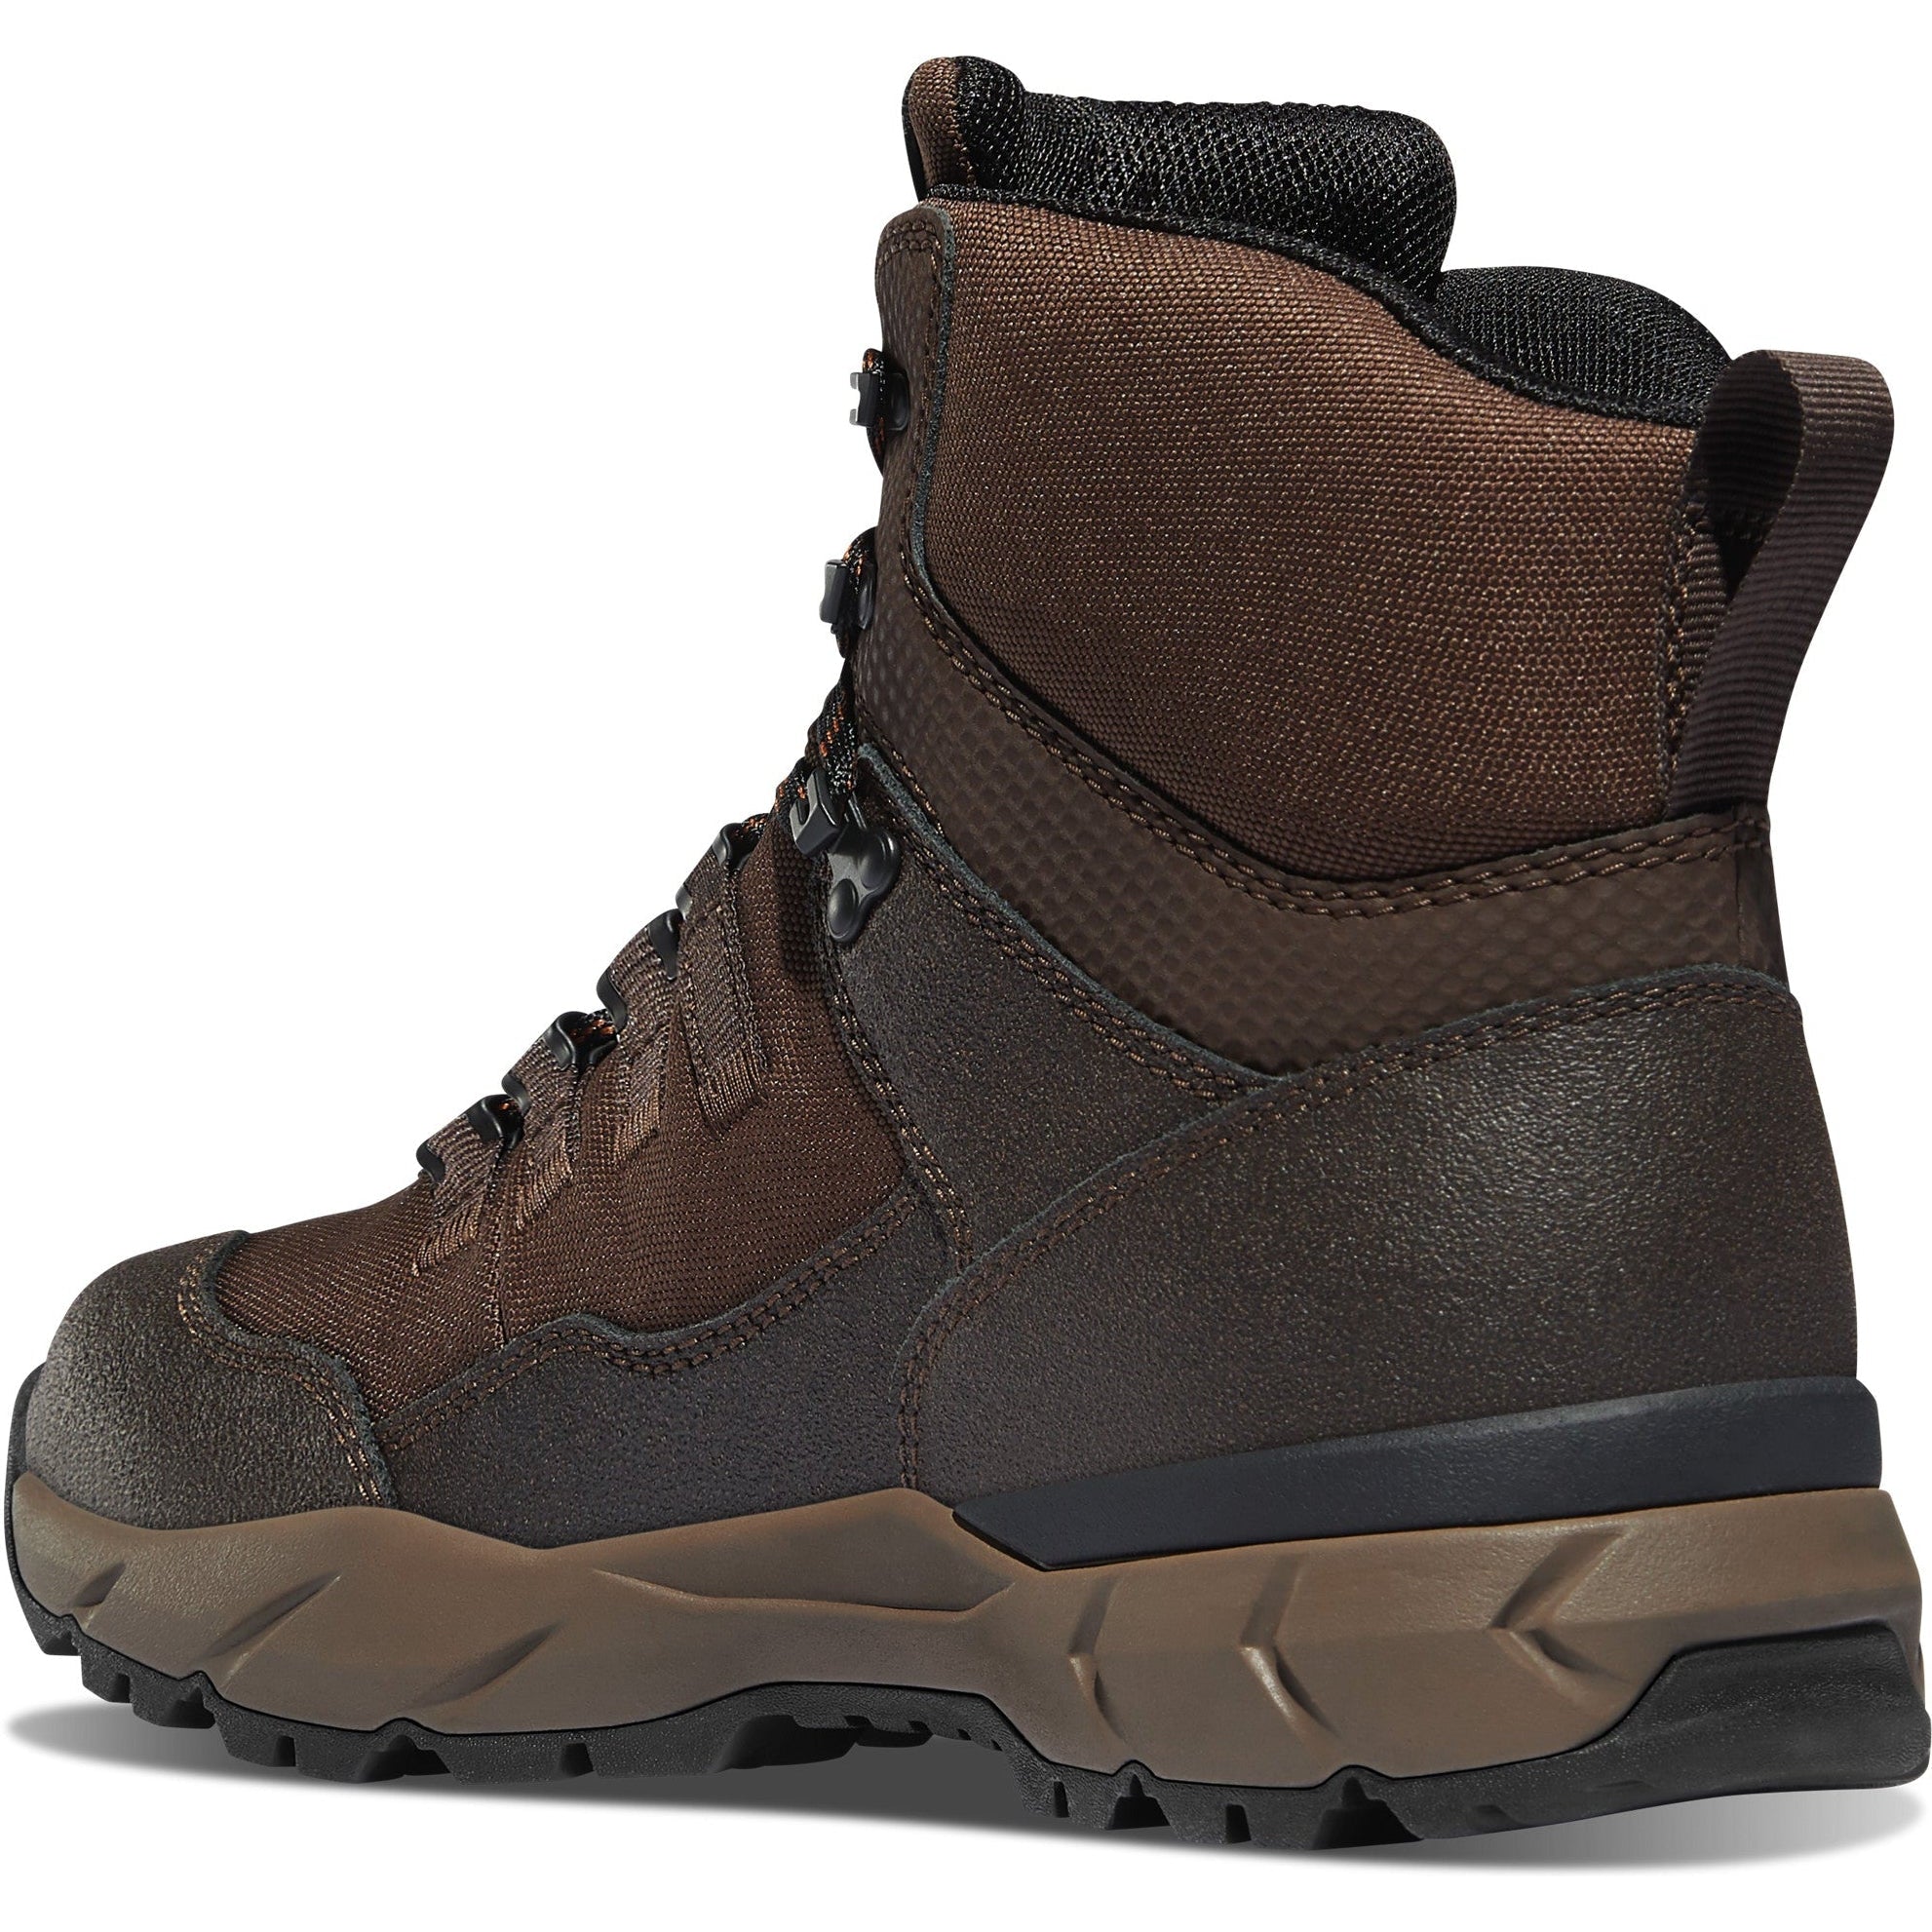 Danner Men's Vital Trail 6" WP Hiking Boot - Coffee Brown - 65300  - Overlook Boots